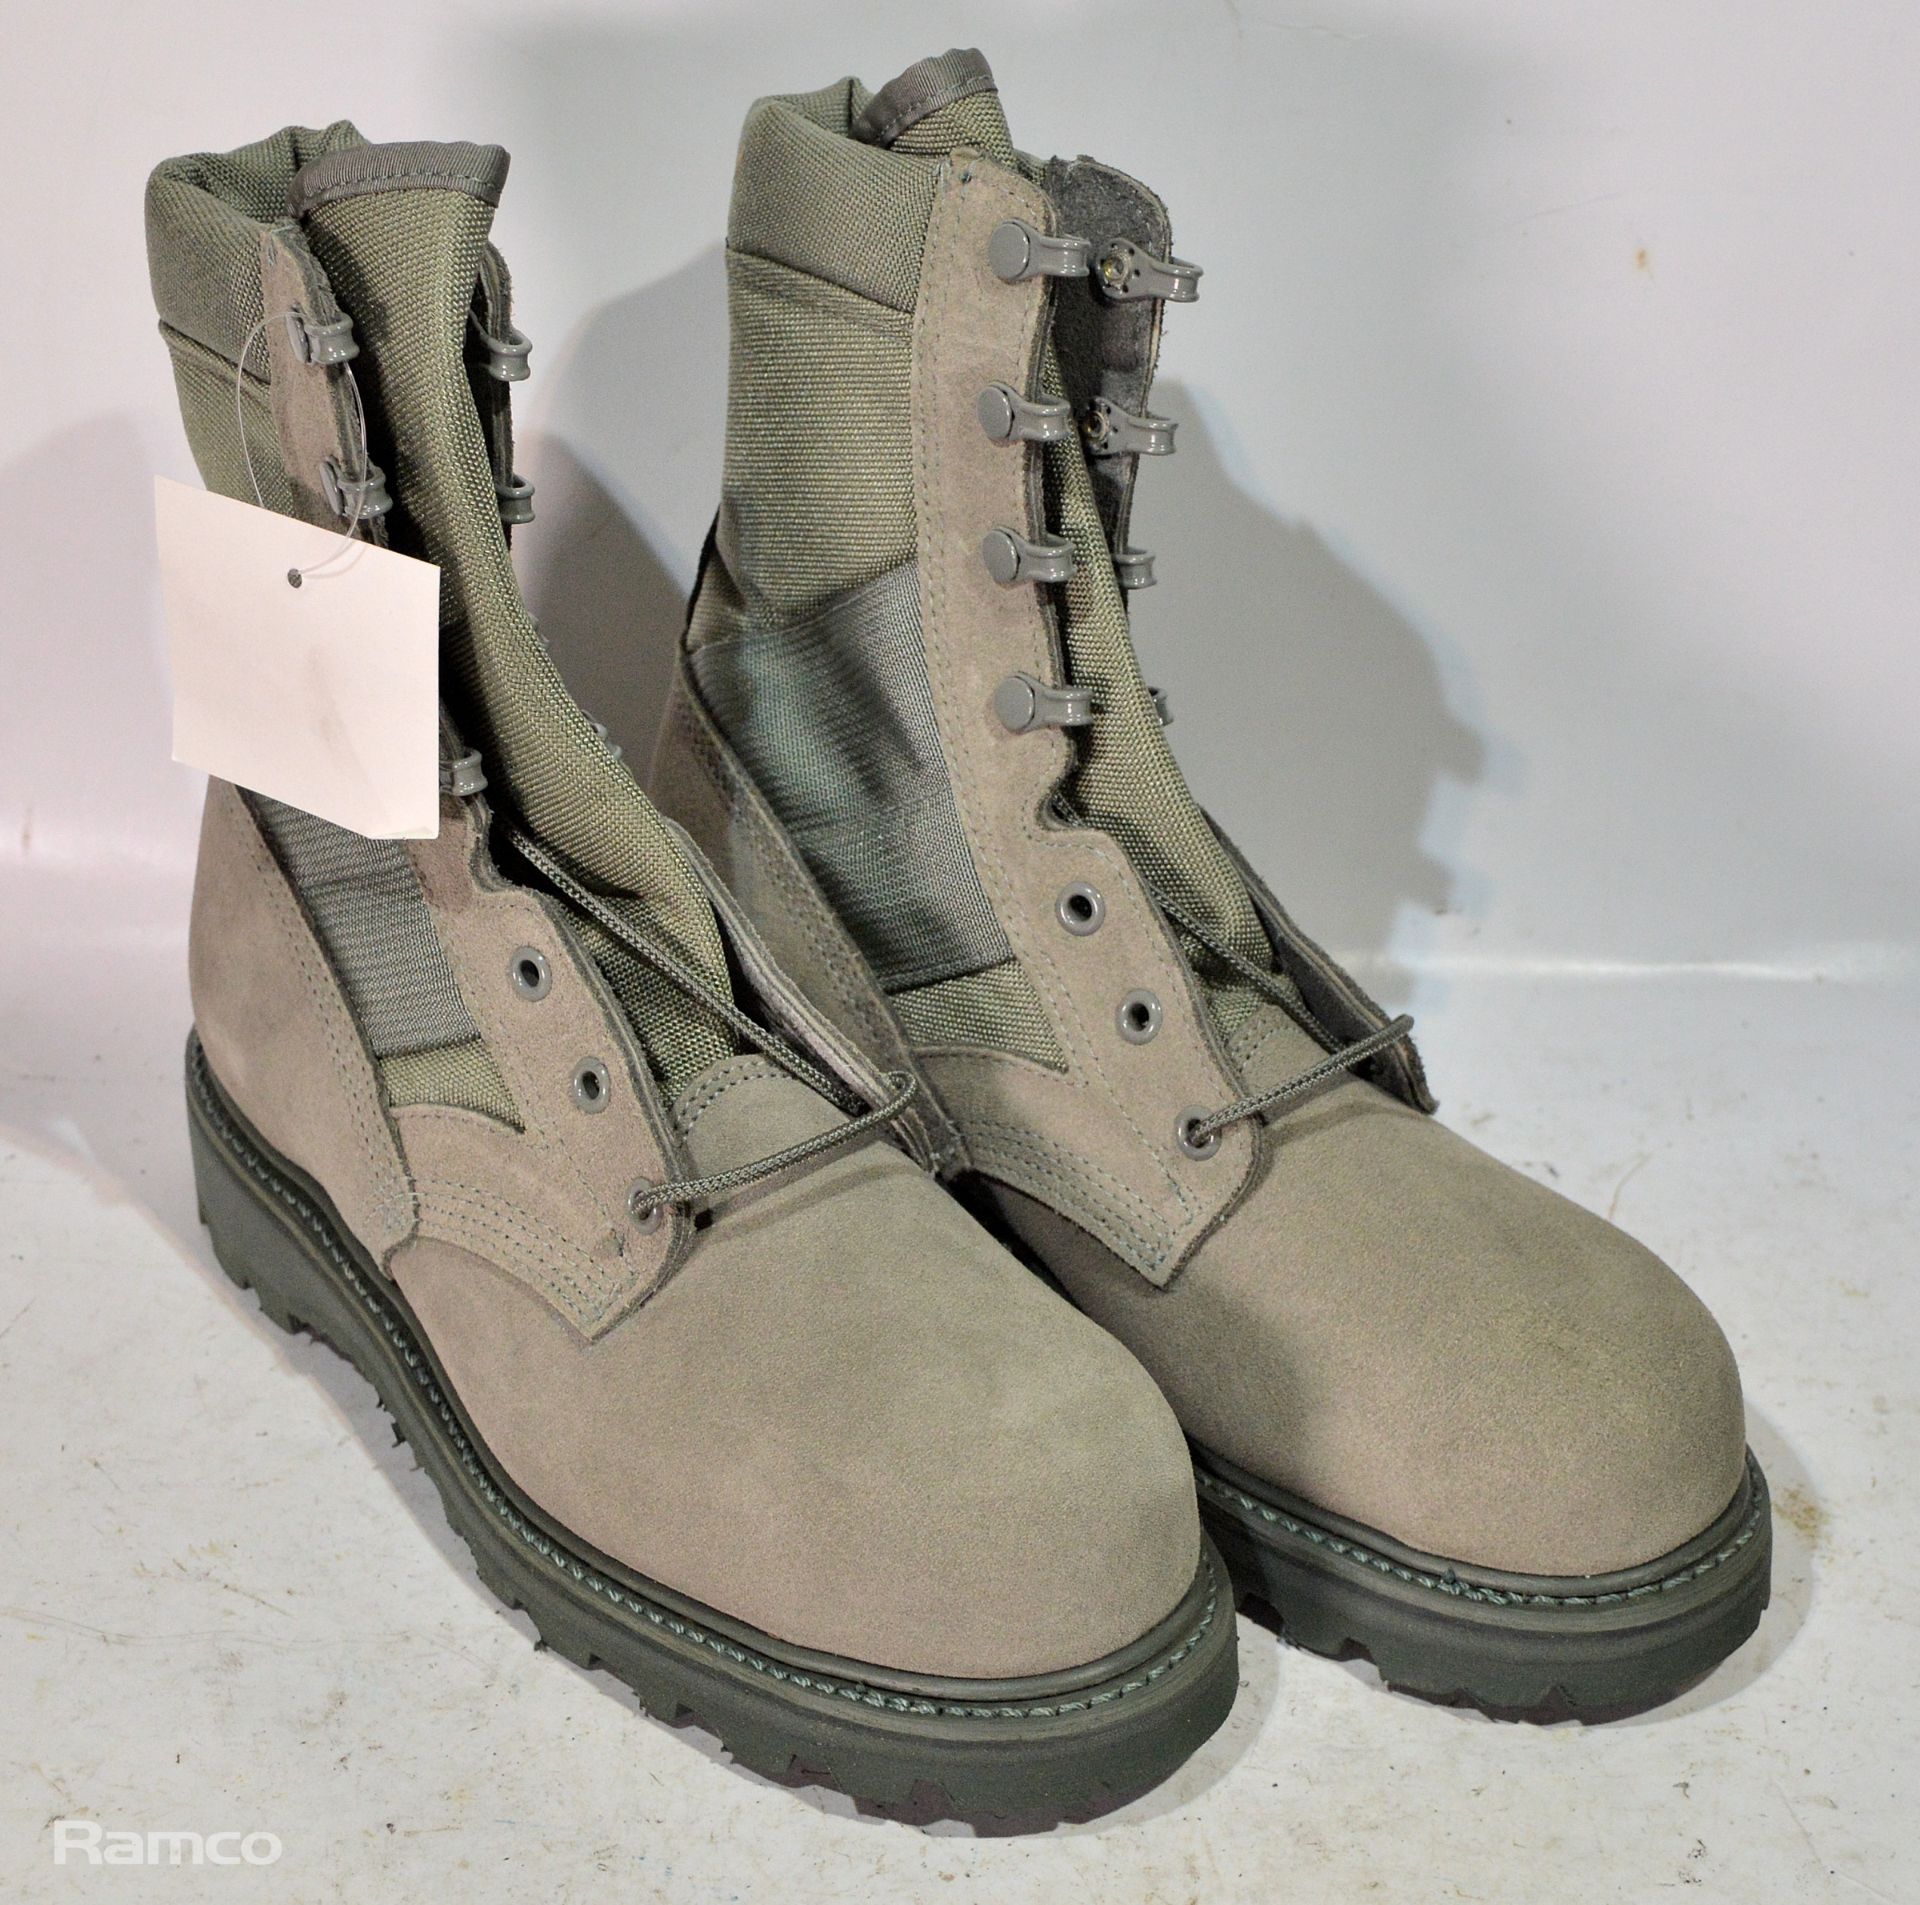 Thorogood Hot Weather Boots - 6 1/2 W